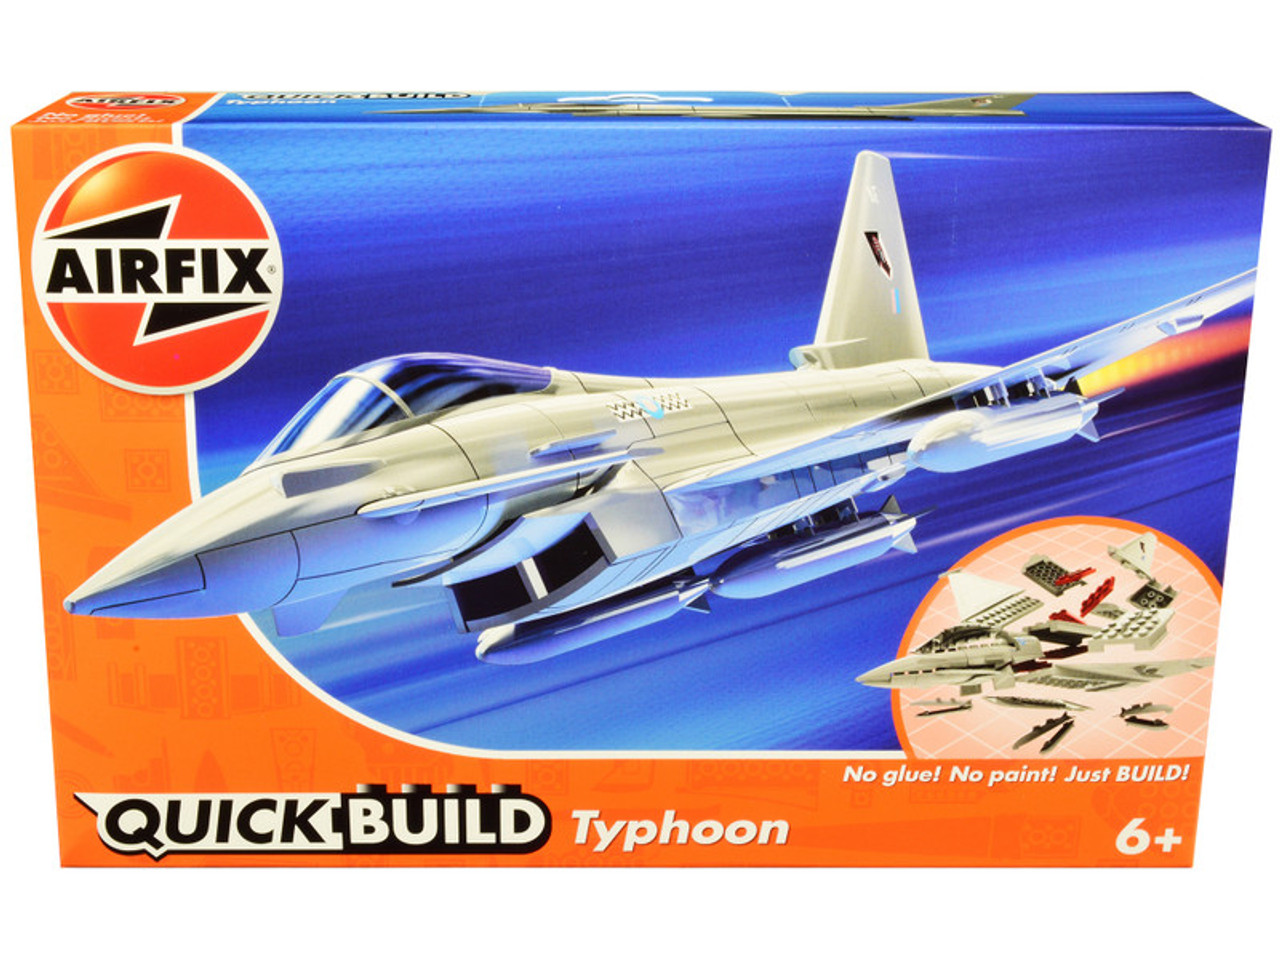 Skill 1 Model Kit Eurofighter Typhoon Snap Together Painted Plastic Model Airplane Kit by Airfix Quickbuild